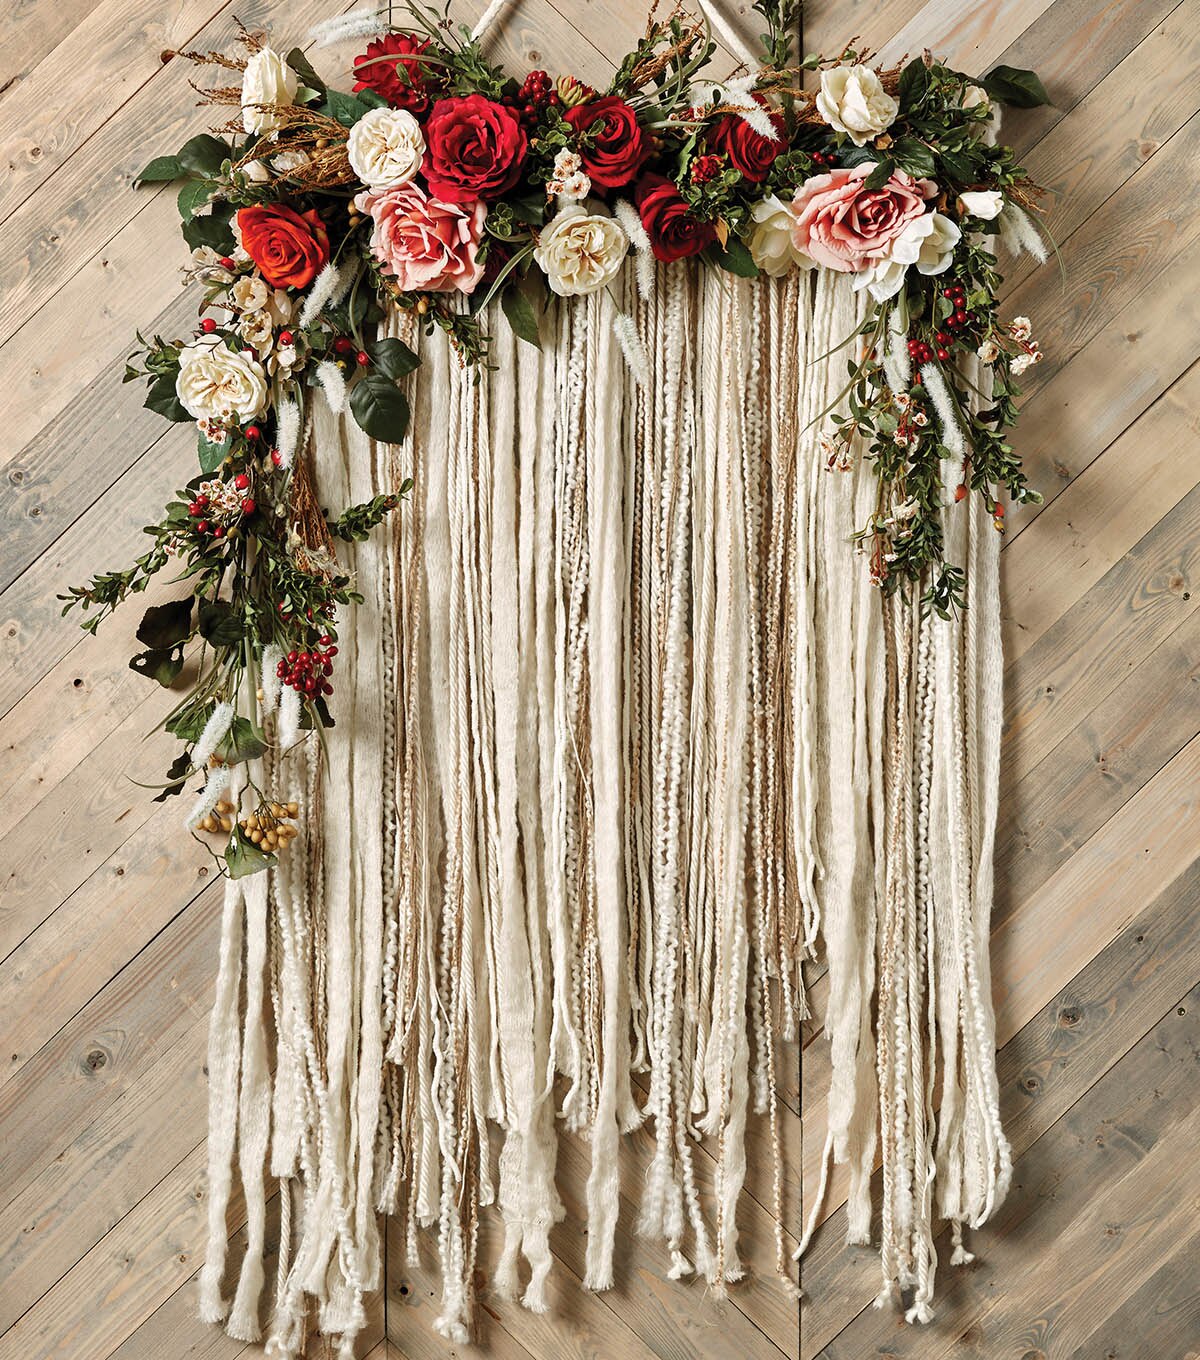 How To Make A Floral Yarn Wall Hanging Joann